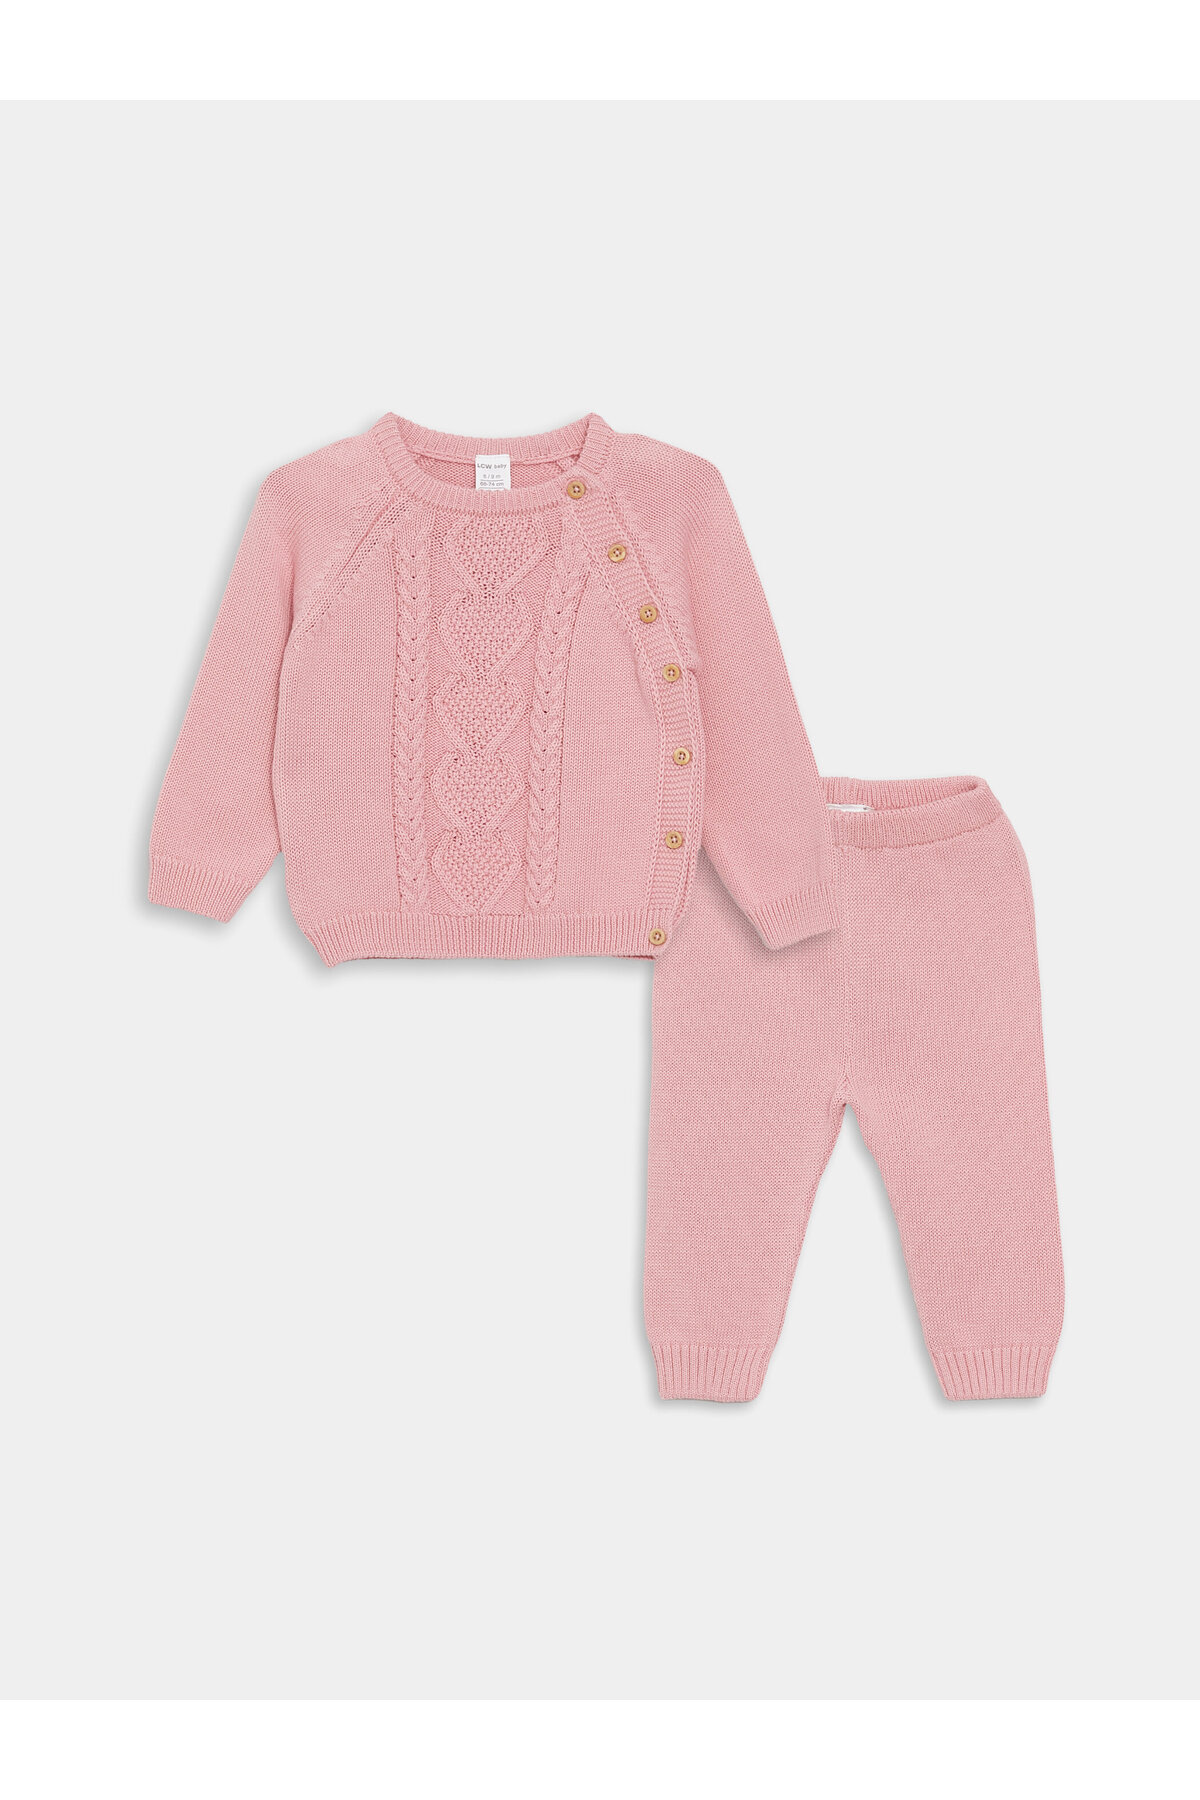 LC Waikiki Crew Neck Long Sleeve Basic Baby Girl Knitwear Sweater And Trousers 2-Piece Set